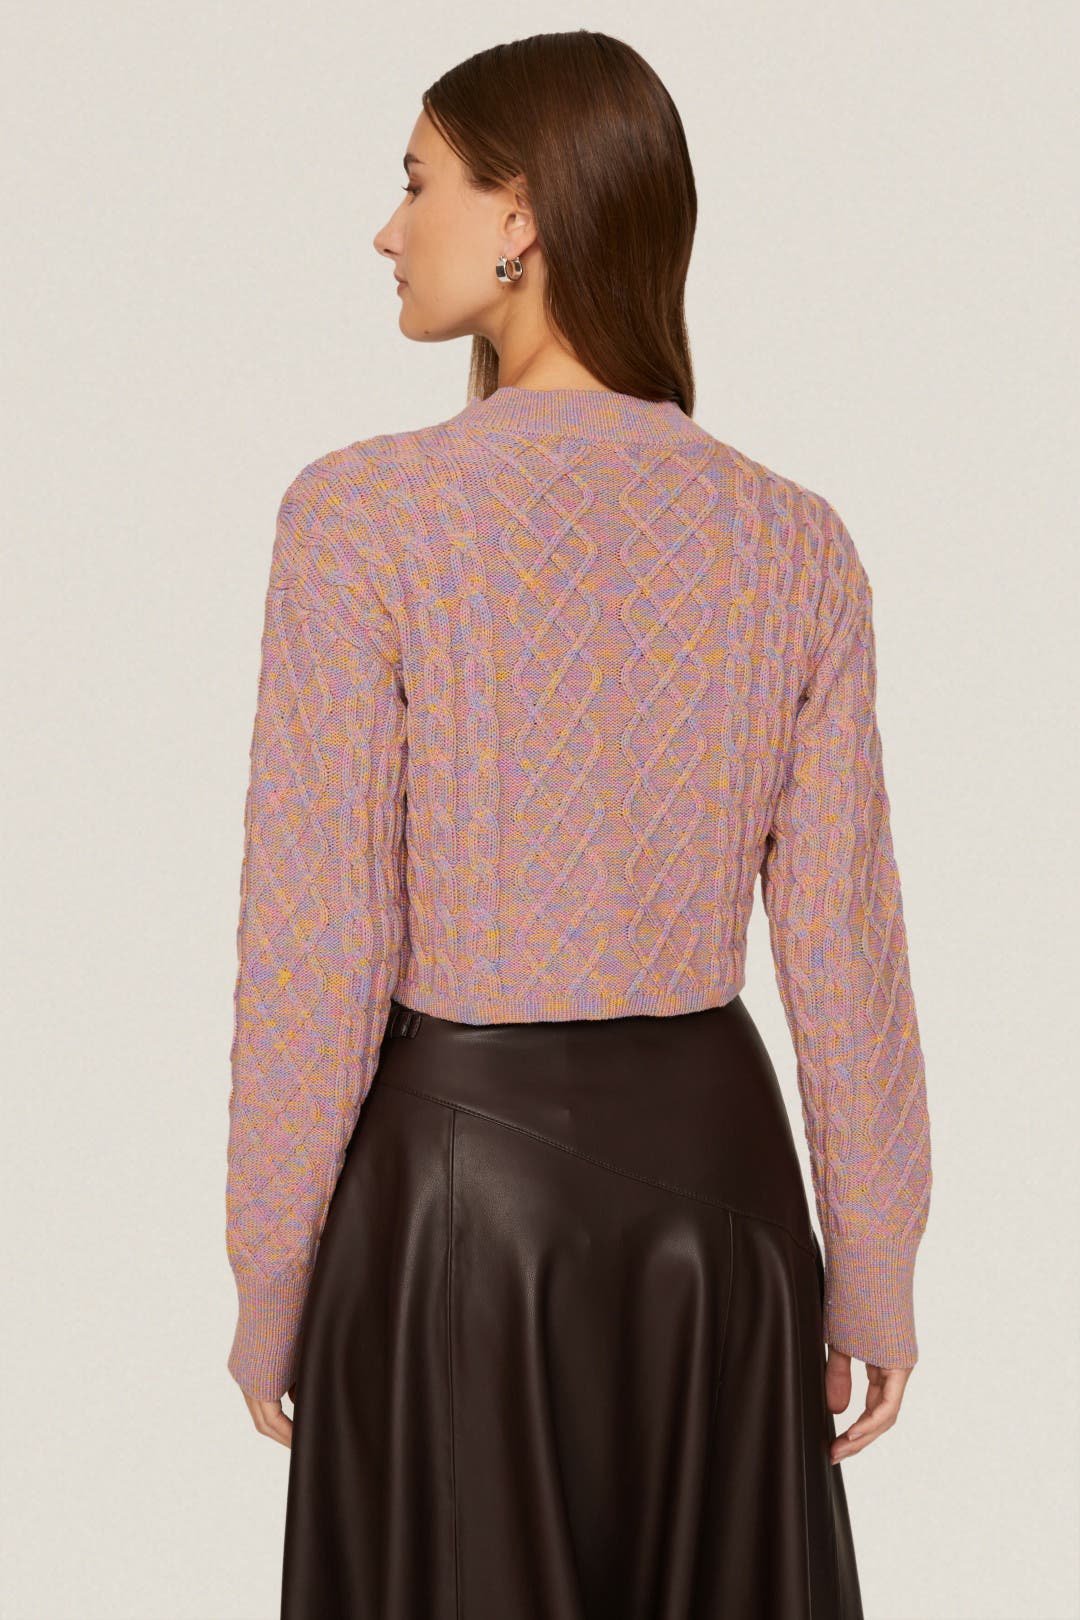 peter som rent the runway collective pink sweater